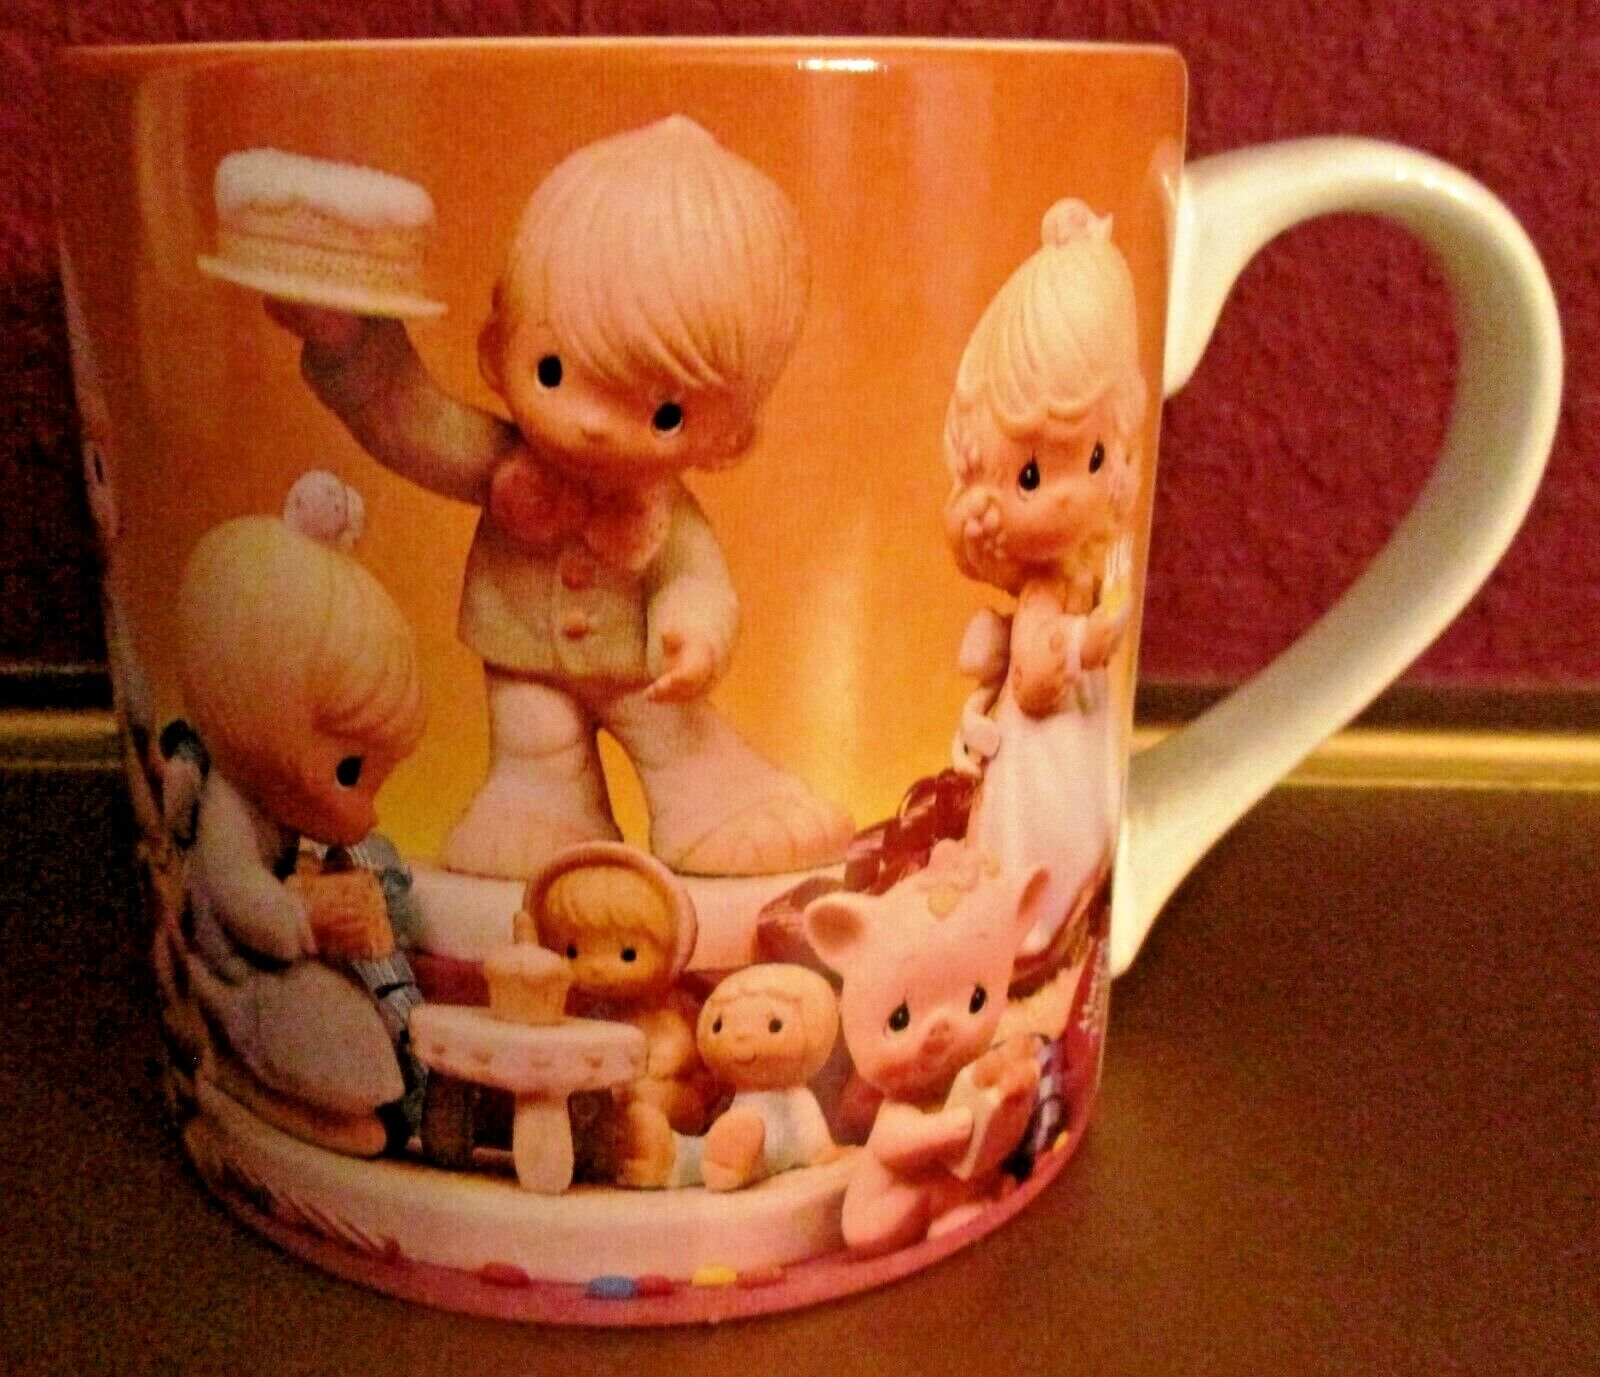 NEW, Precious Moments Lg Coffee Mug “Birthdays Are Filled With Precious Moments”